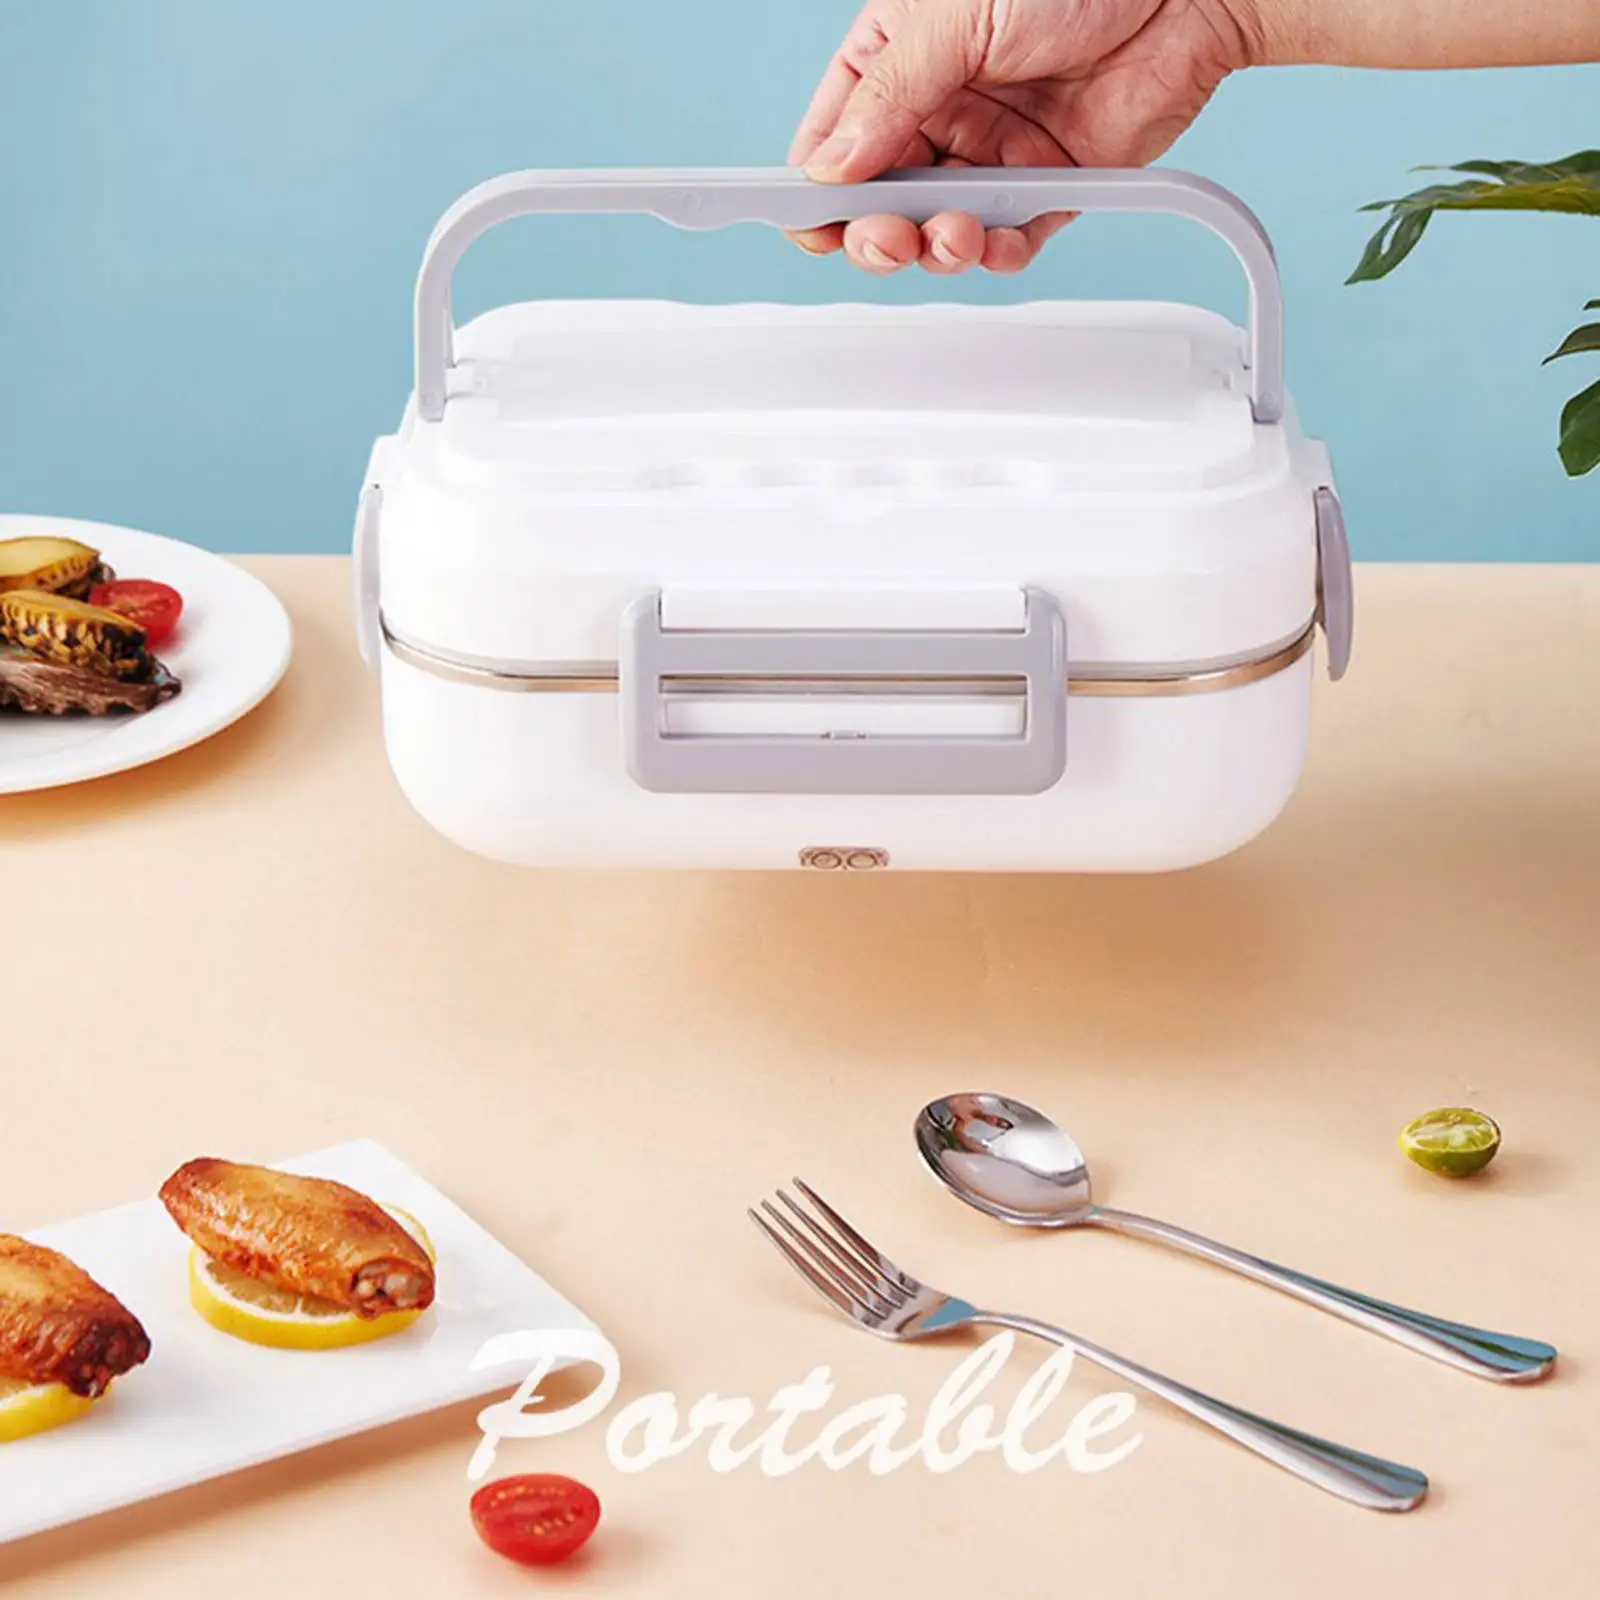 Stainless Steel Dual Use Electric Lunch Box 2 in 1 Heated Container With Cutlery Box Phone Holder Easy to Clean US Adpater